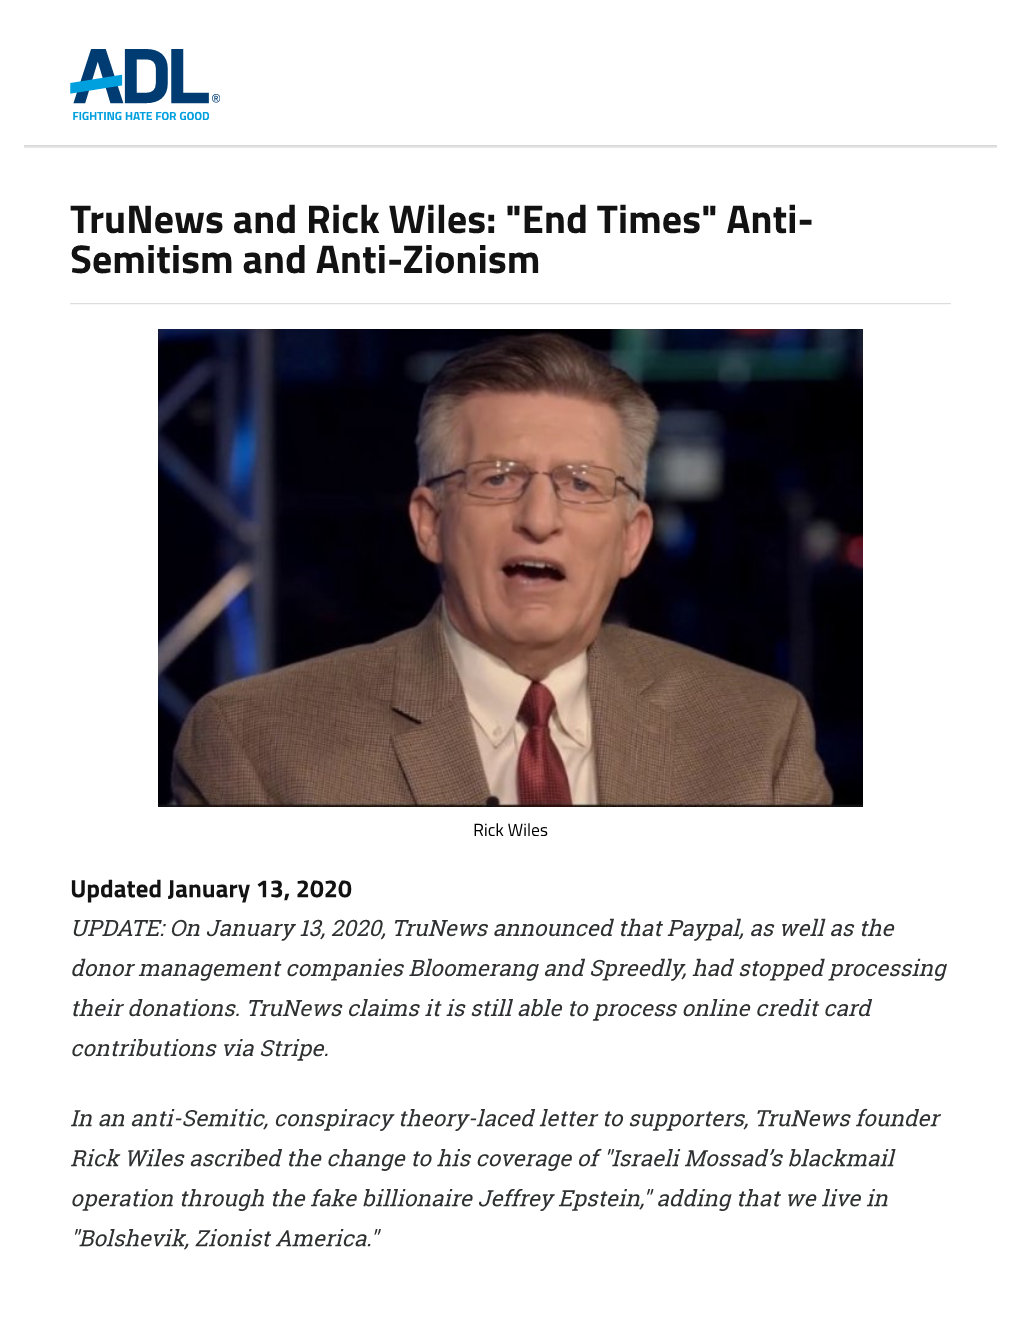 Trunews and Rick Wiles: "End Times" Anti- Semitism and Anti-Zionism